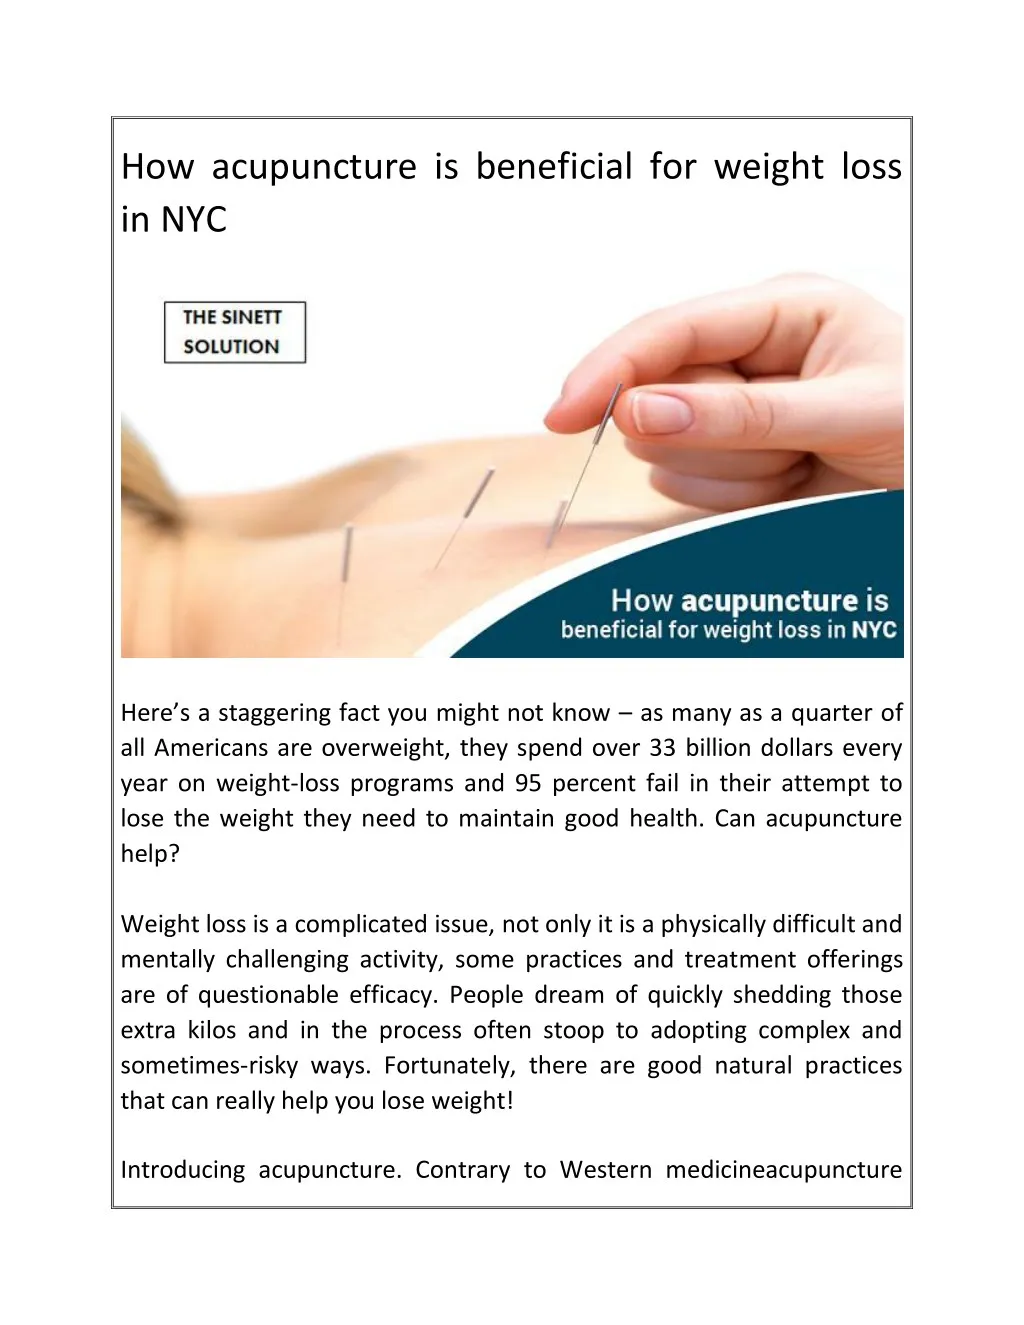 how acupuncture is beneficial for weight loss